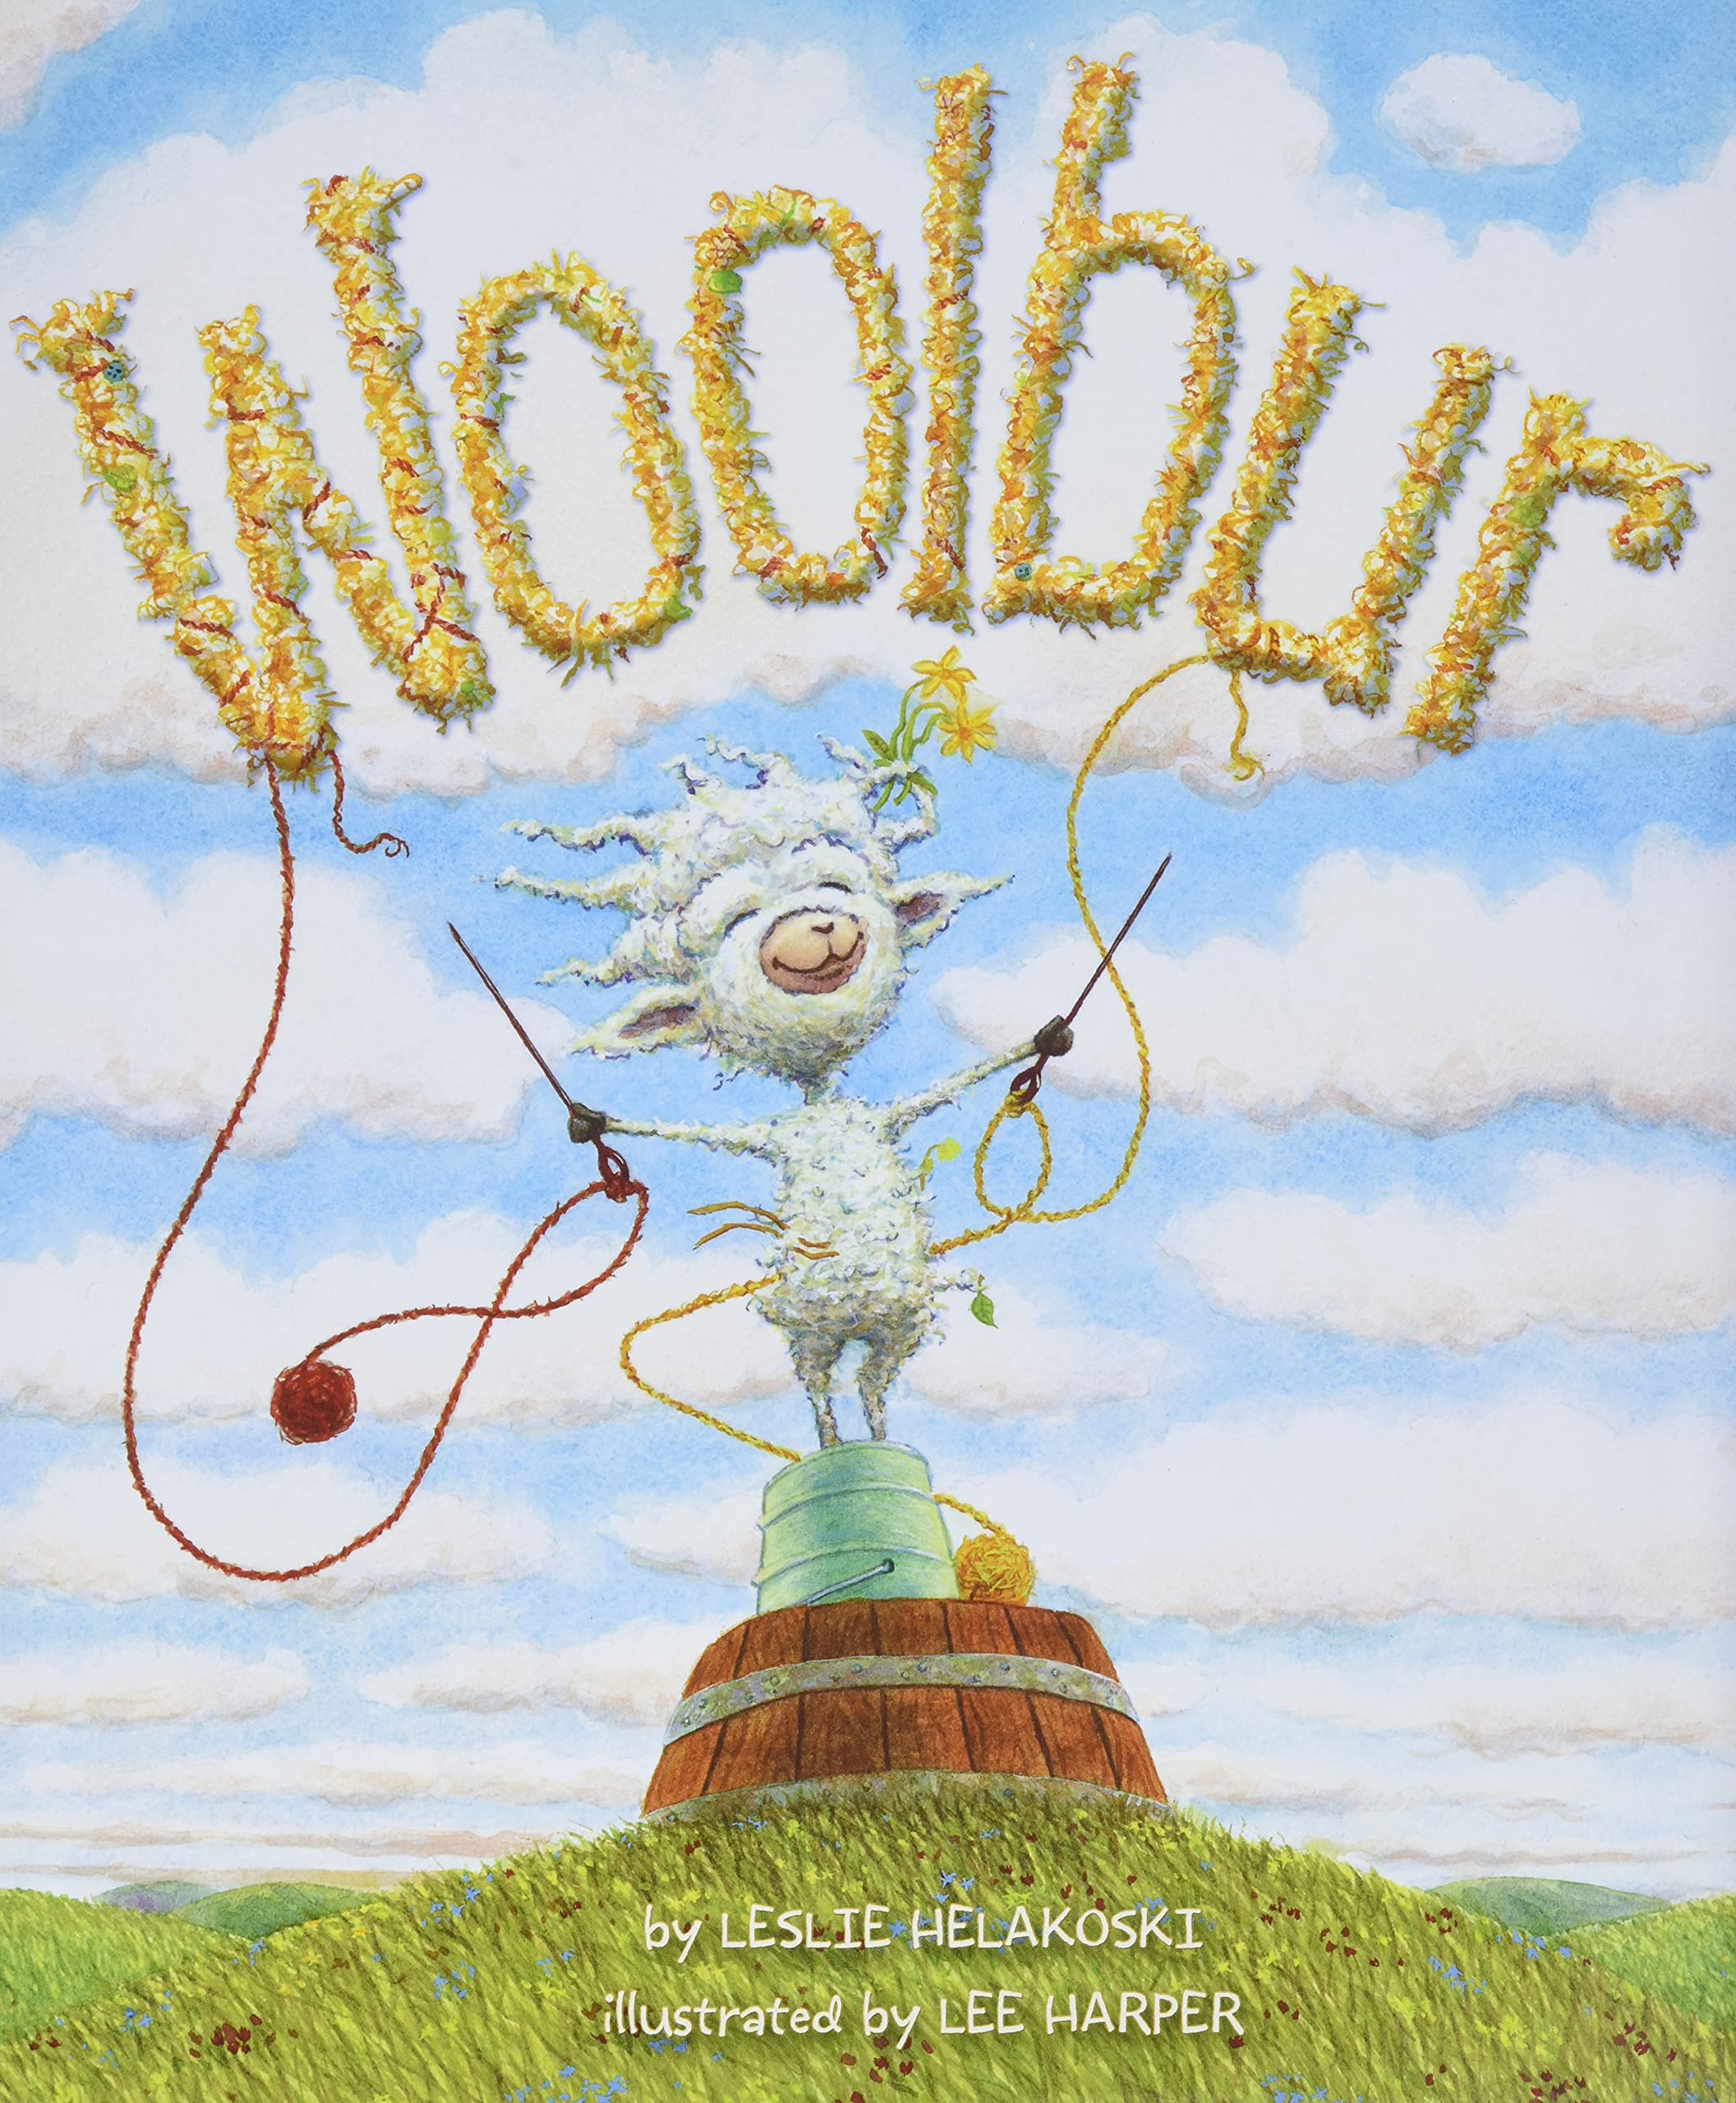 A book cover titled Woolbur